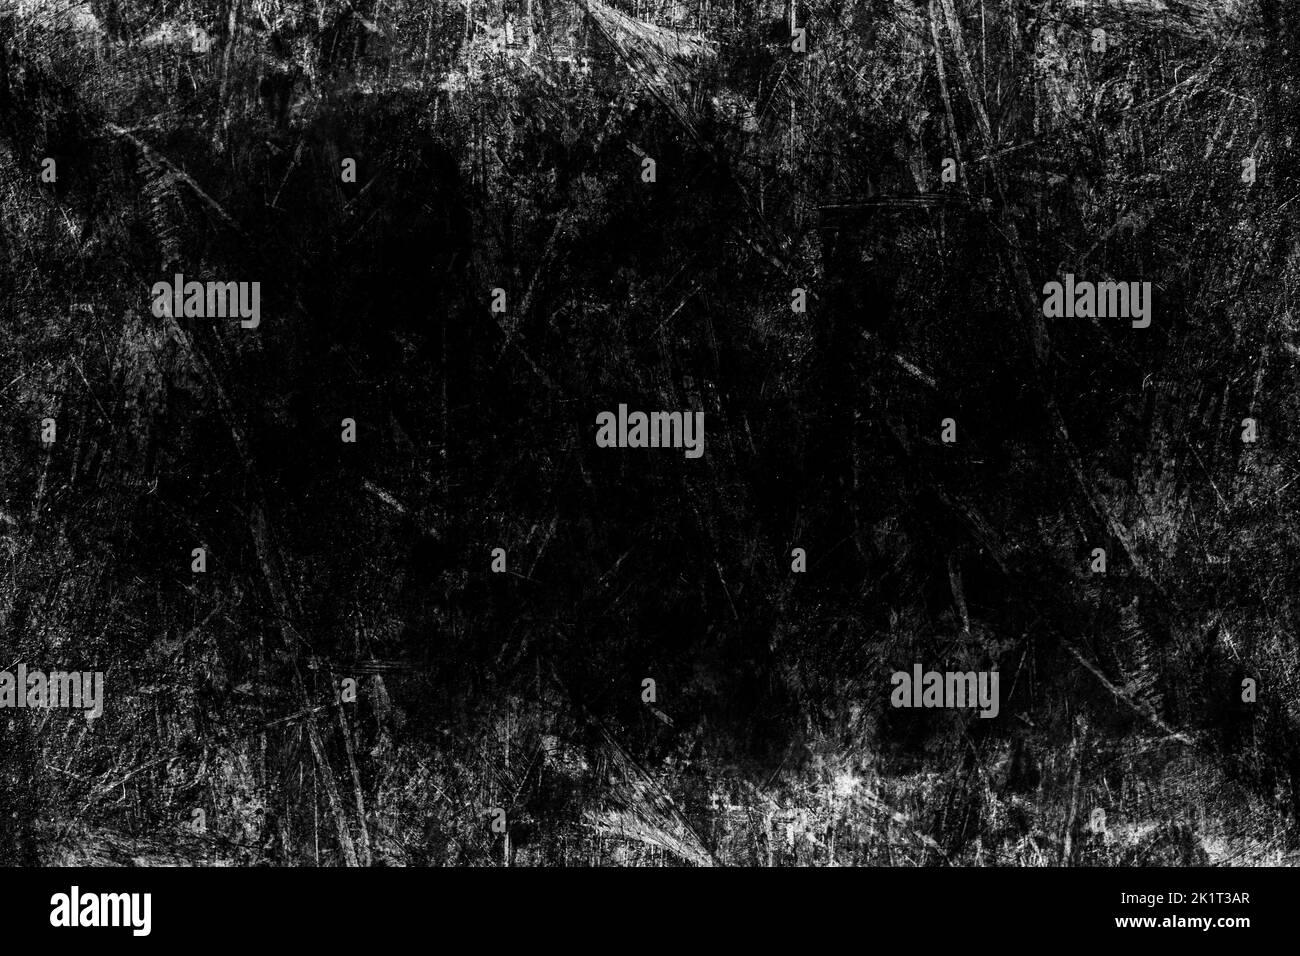 Grunge dirty scratch mask texture photo frame, Black scratched background for overlay graphic effect element. Stock Photo